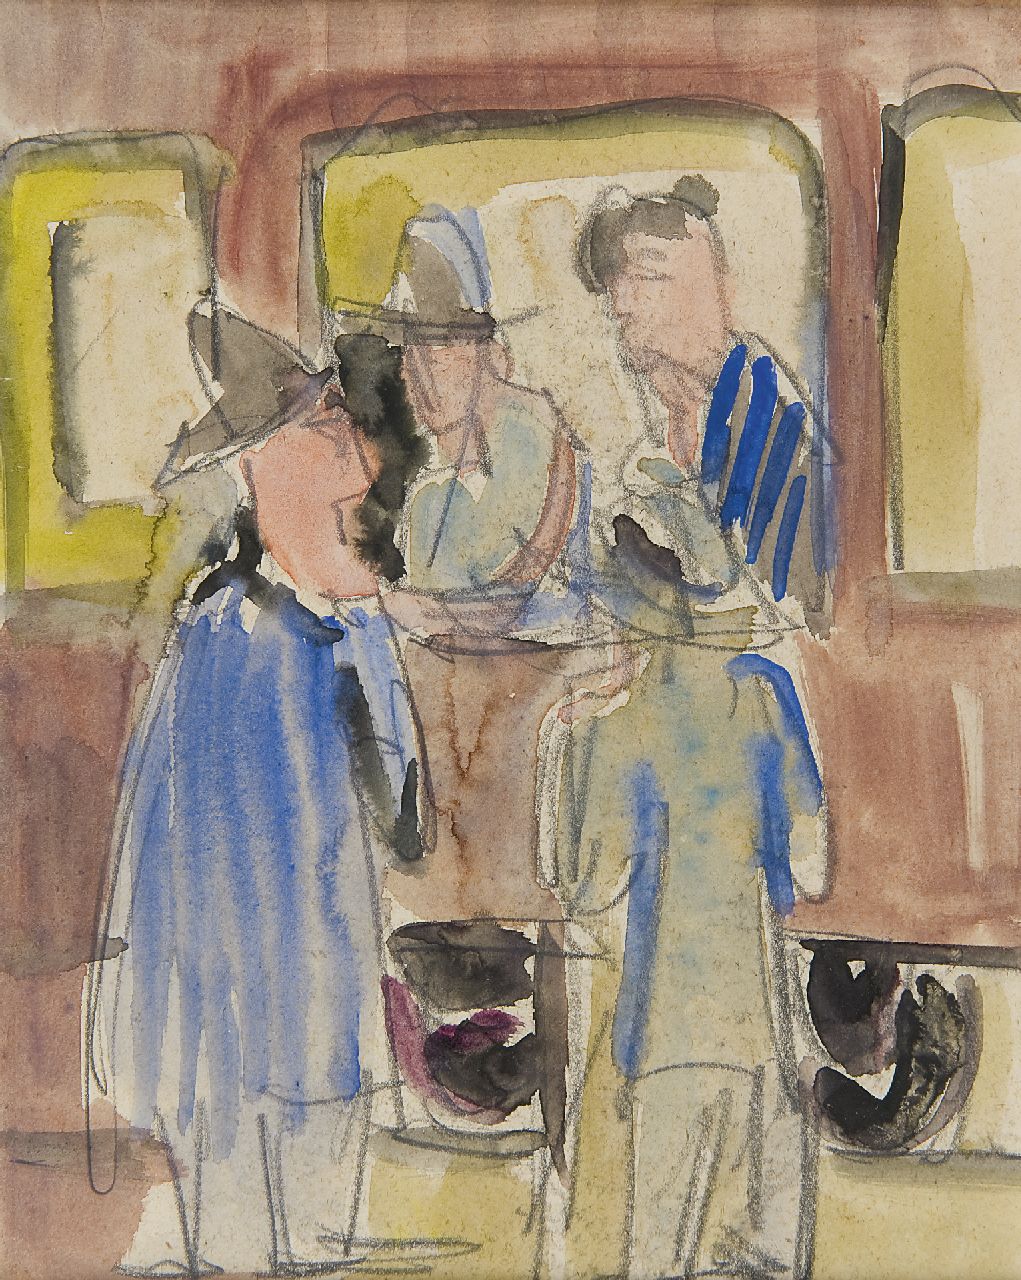 Kirchner E.L.  | Ernst Ludwig Kirchner, A farewell on the station, pencil and watercolour on paper 20.8 x 16.6 cm